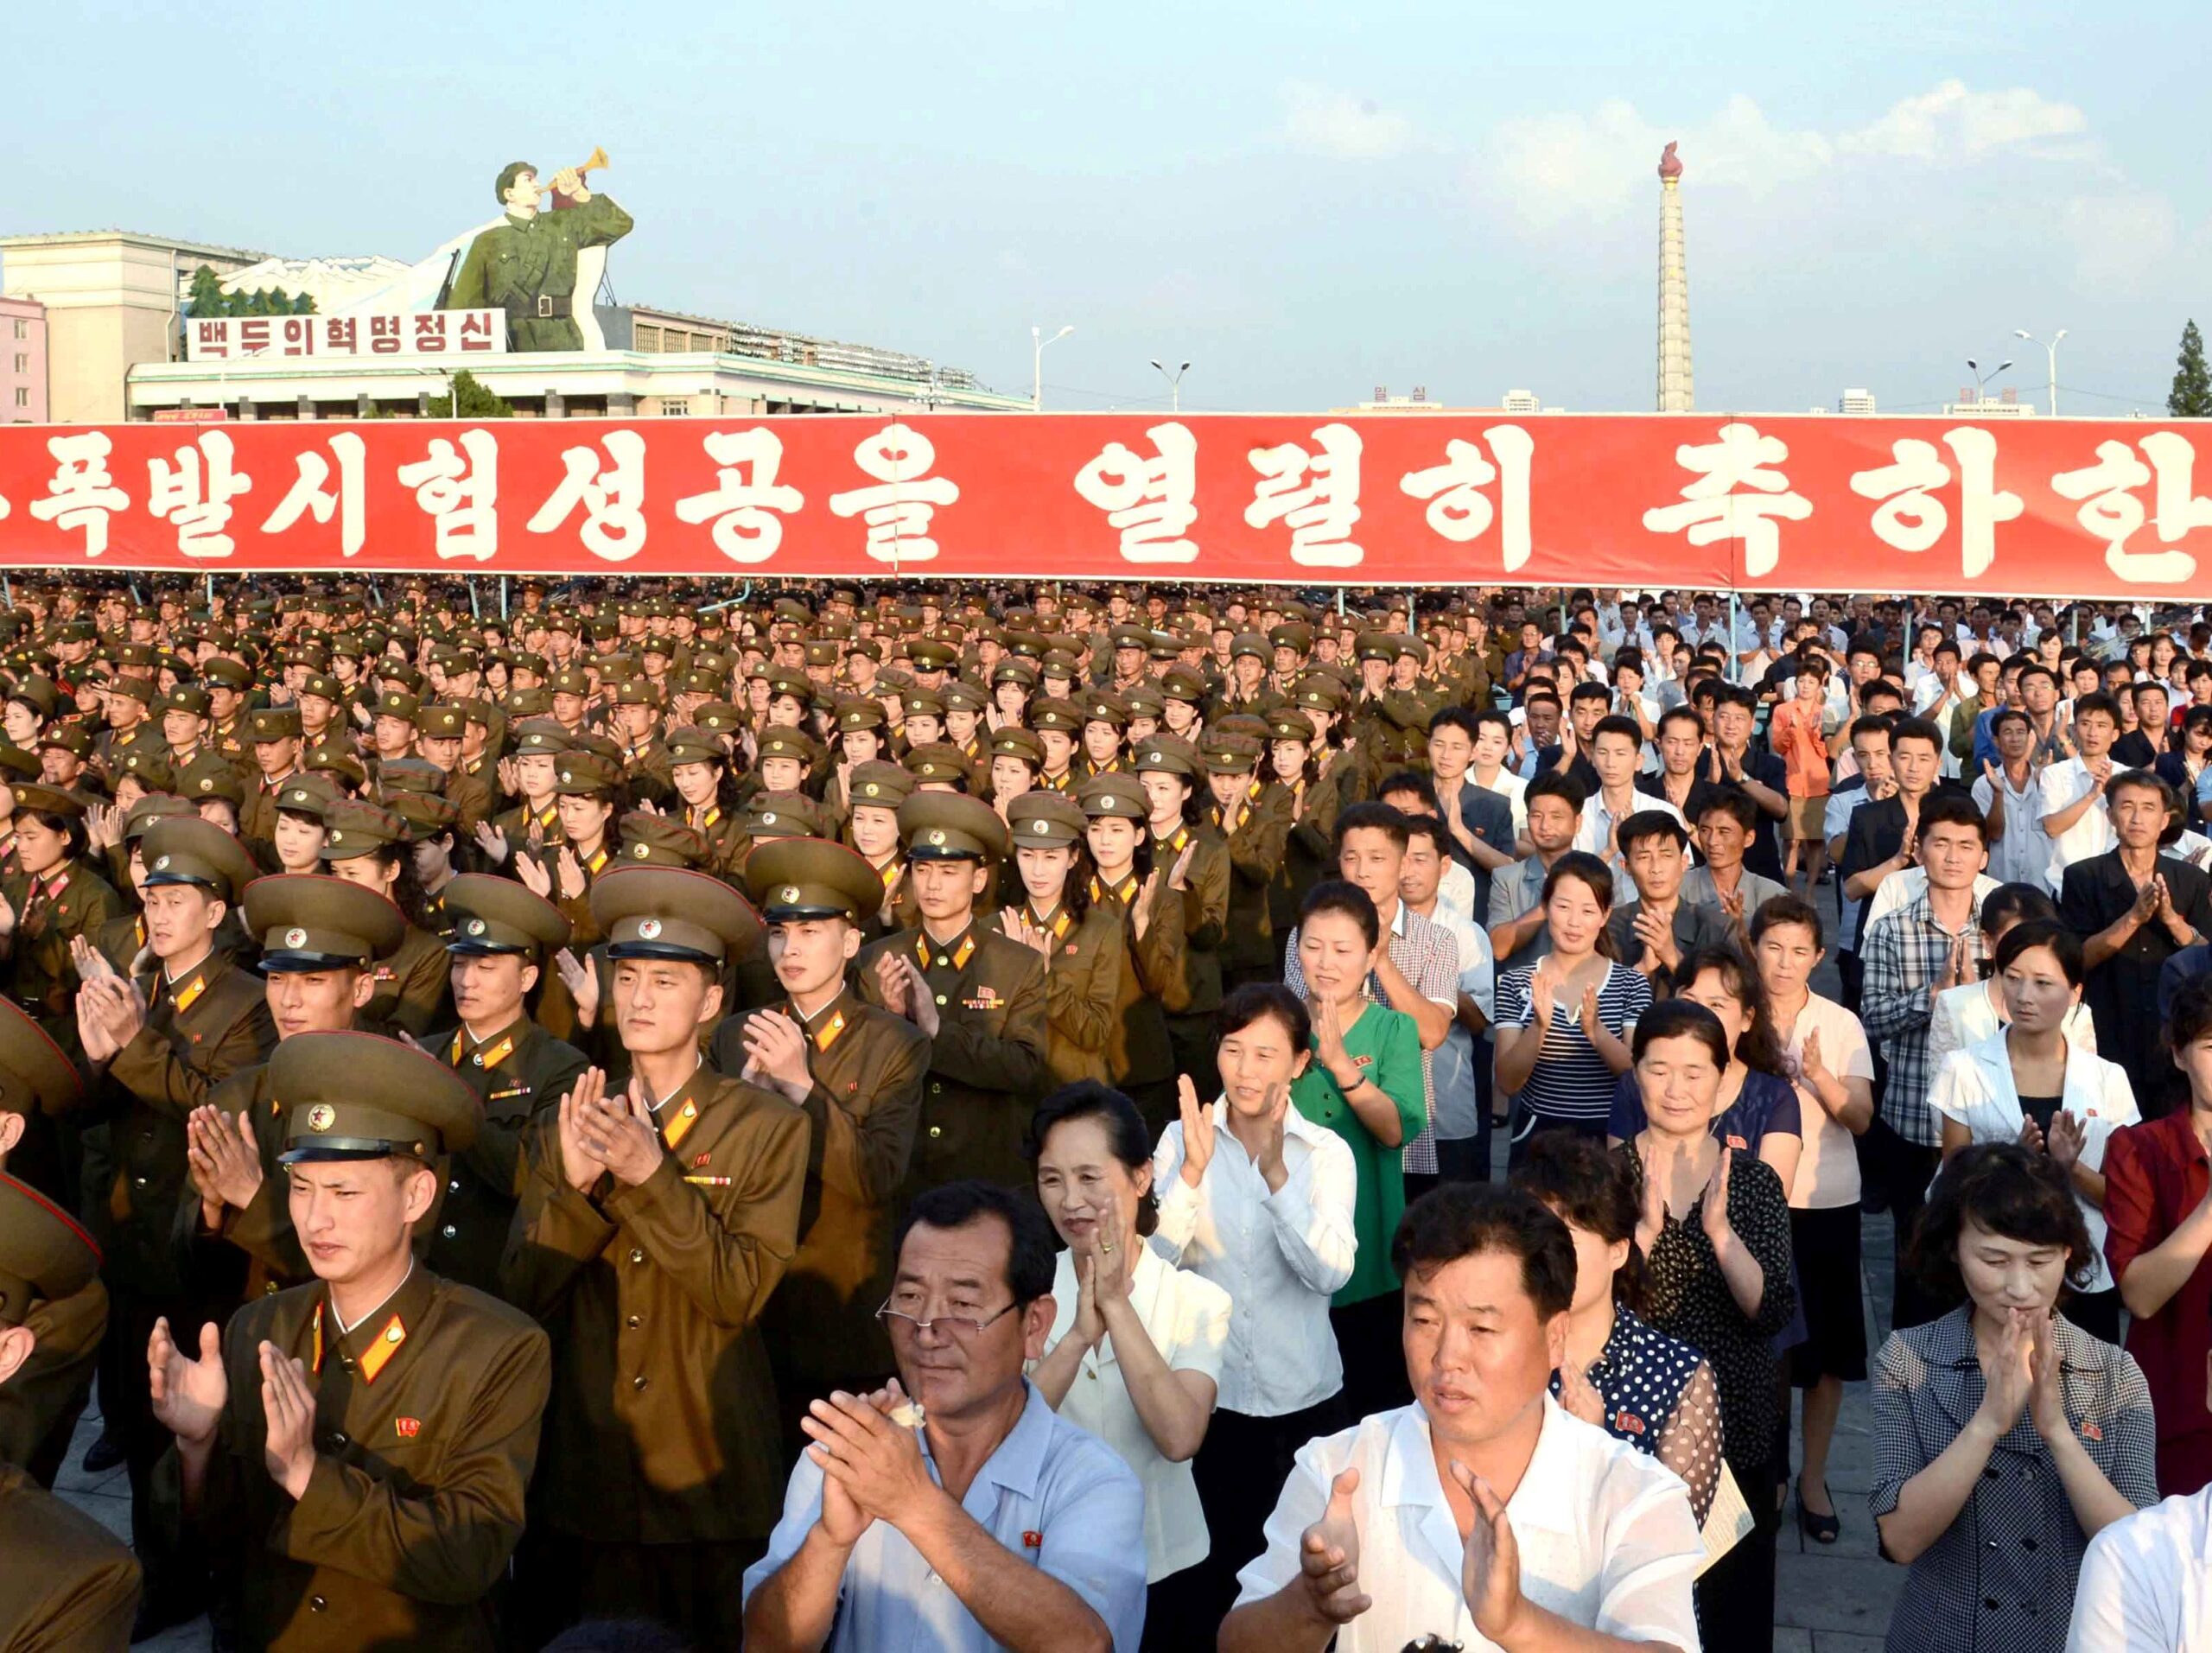 A rally celebrating the success of a recent nuclear test is held in Kim Il Sung square